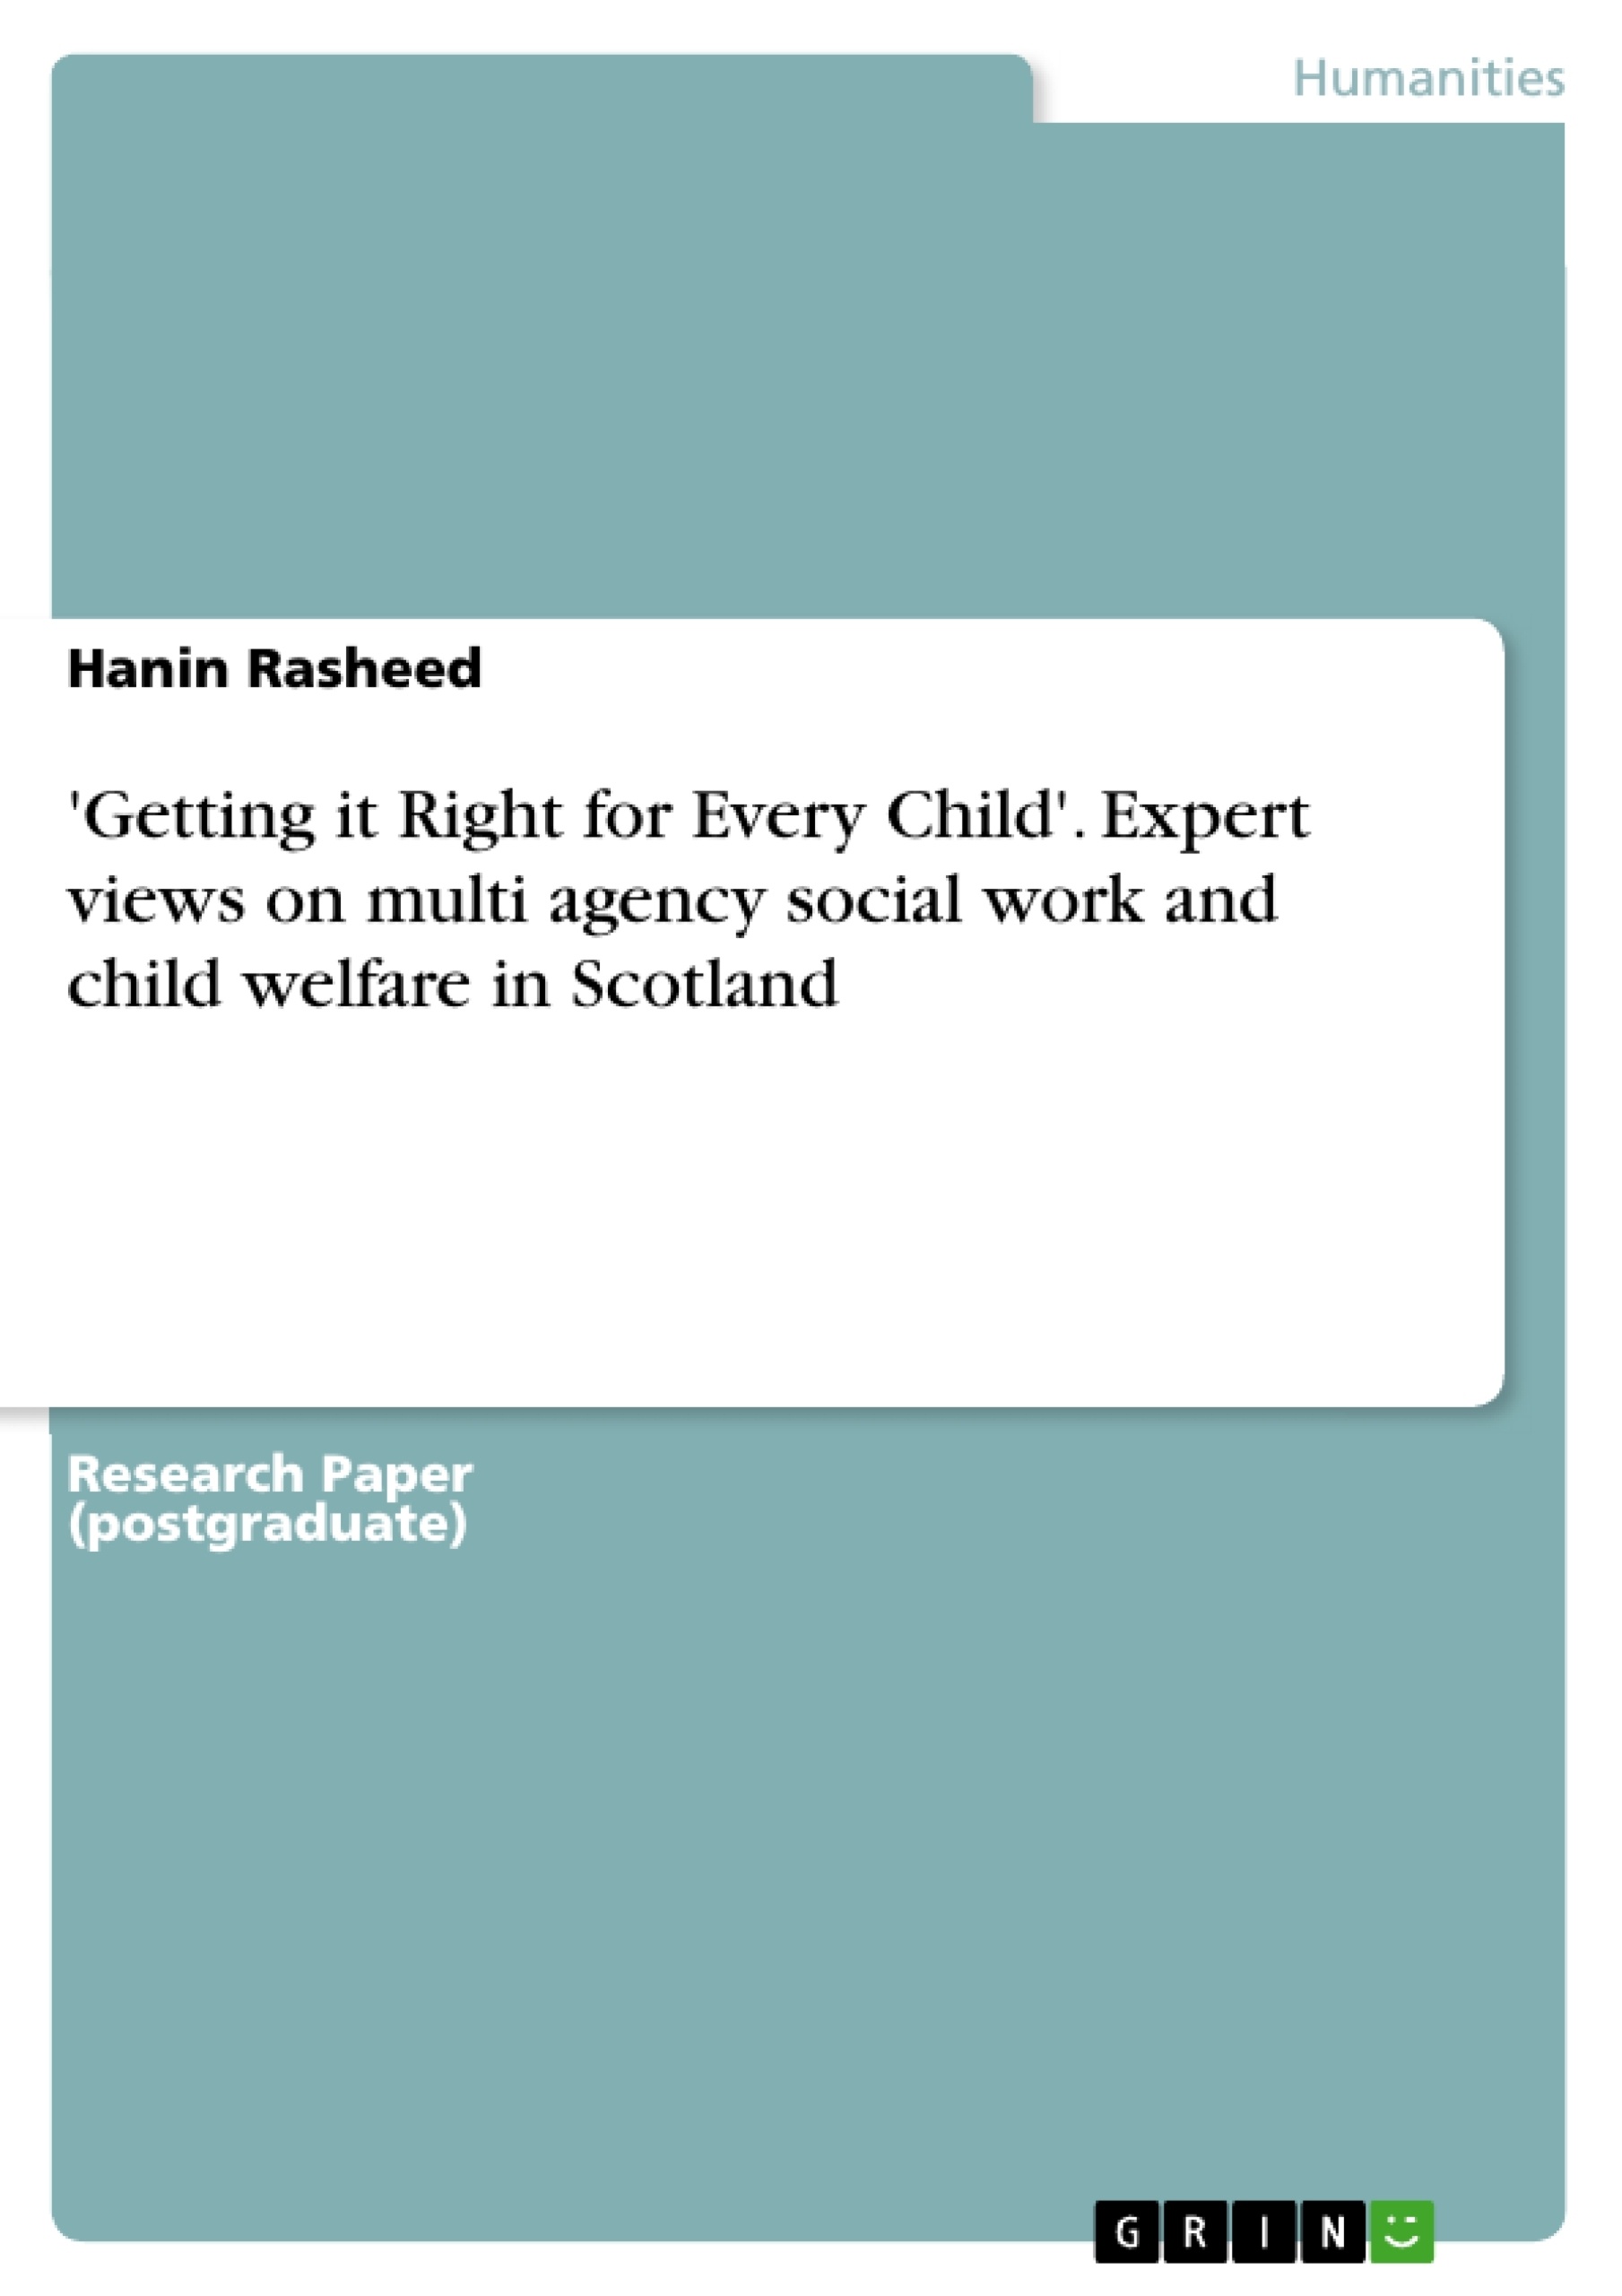 Titel: 'Getting it Right for Every Child'. Expert views on multi agency social work and child welfare in Scotland